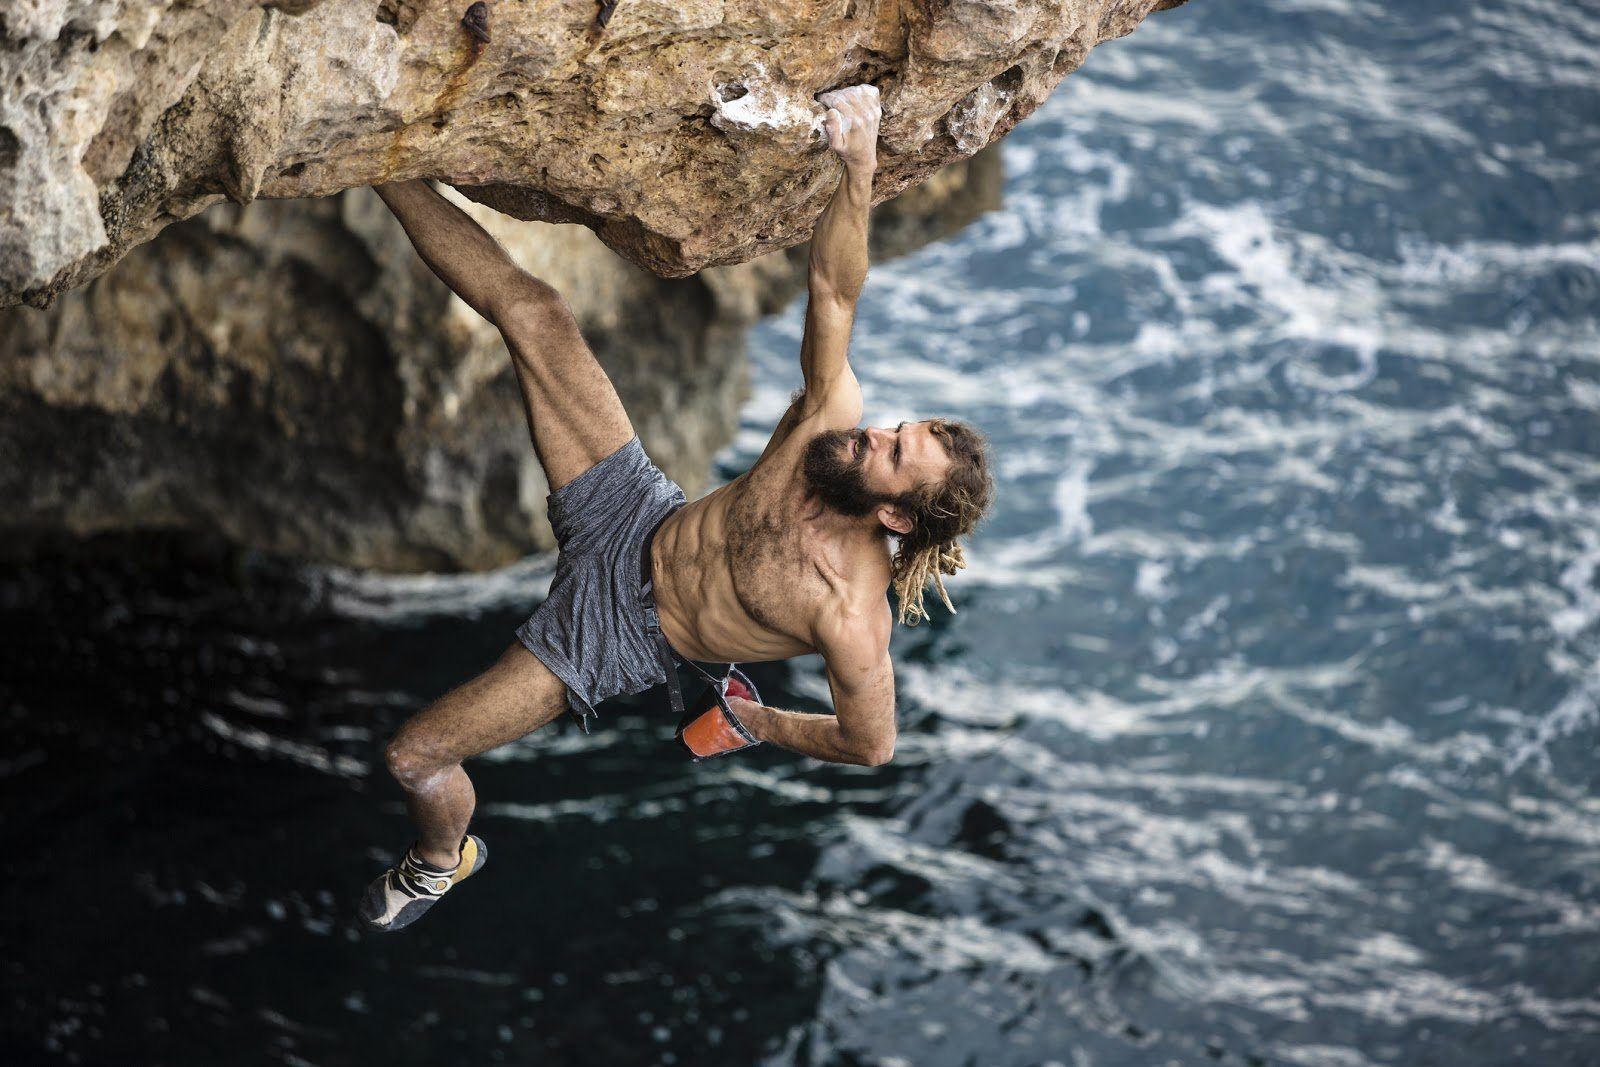 Know More About Free Soloing And The Best Merino Blend Socks